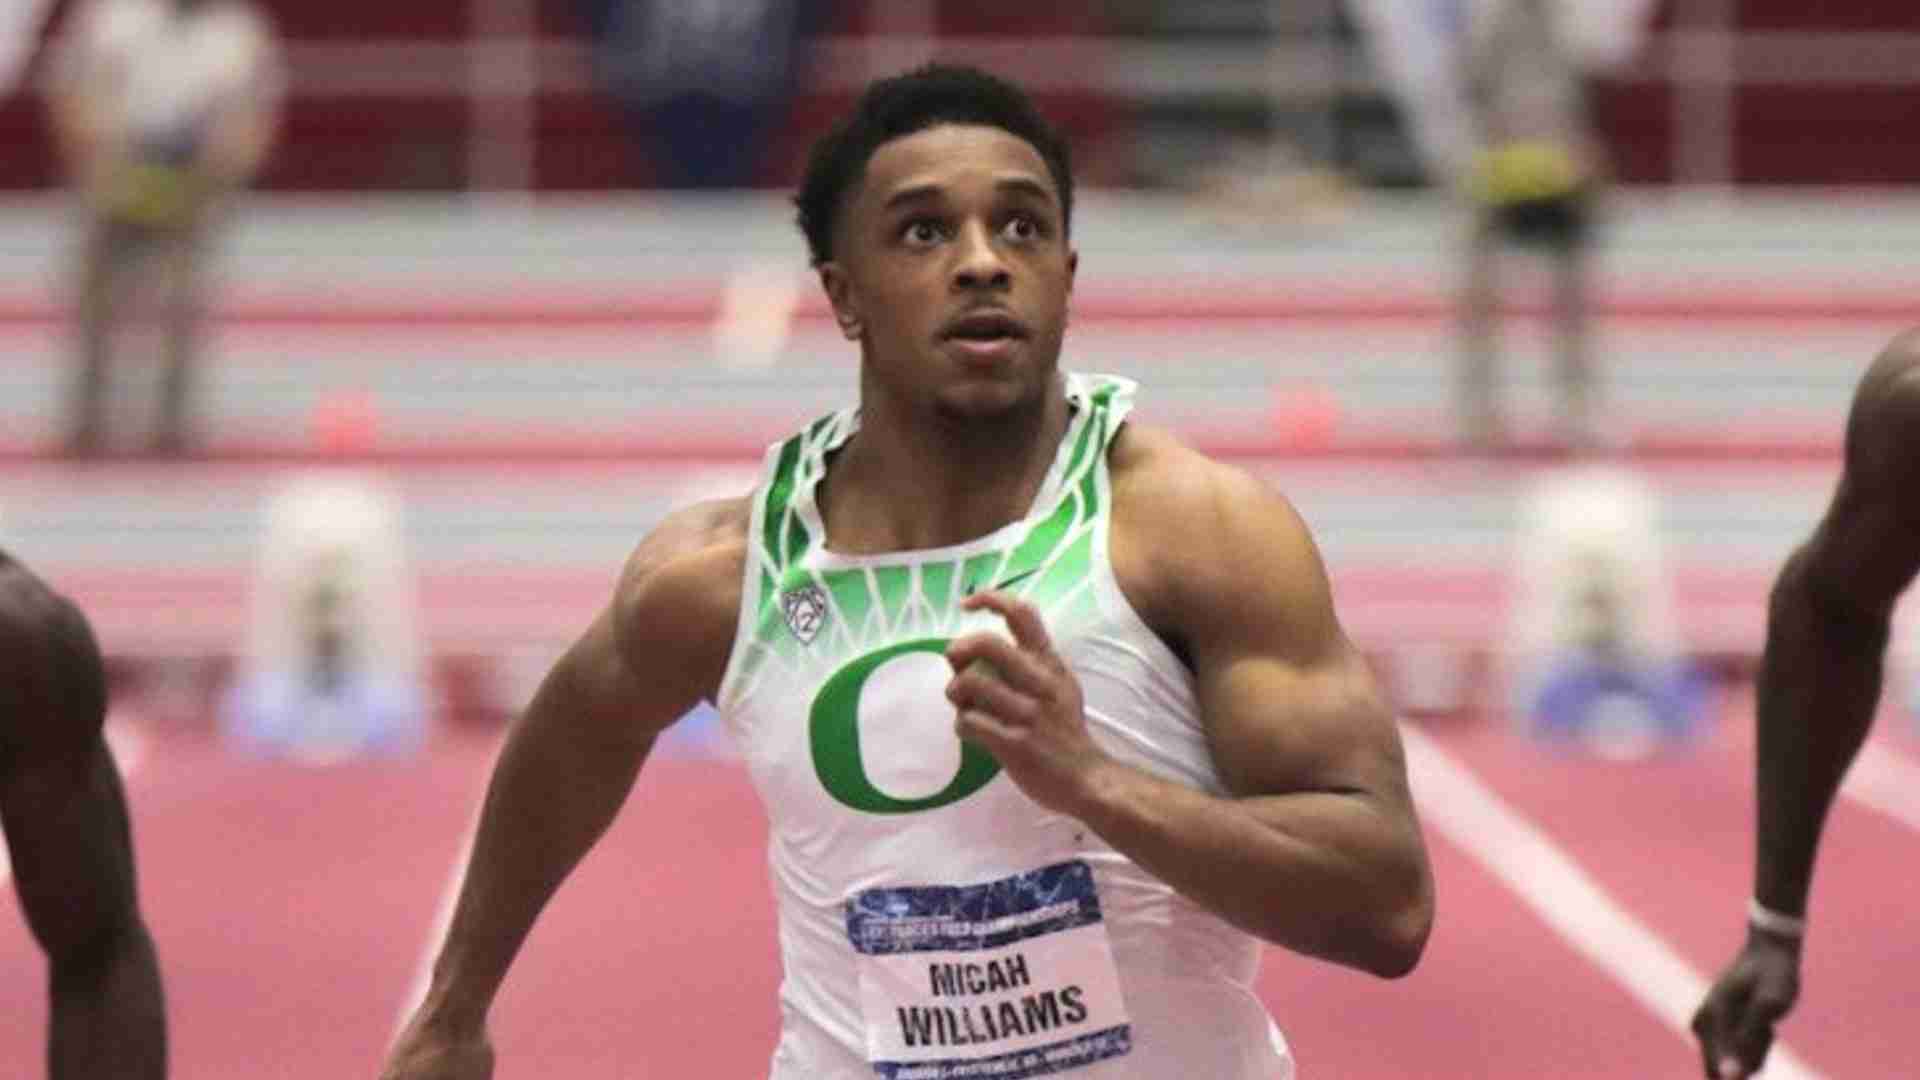 Micah Williams of Oregon in men's 60m at the 2021 NCAA Indoor Track and Field Championships